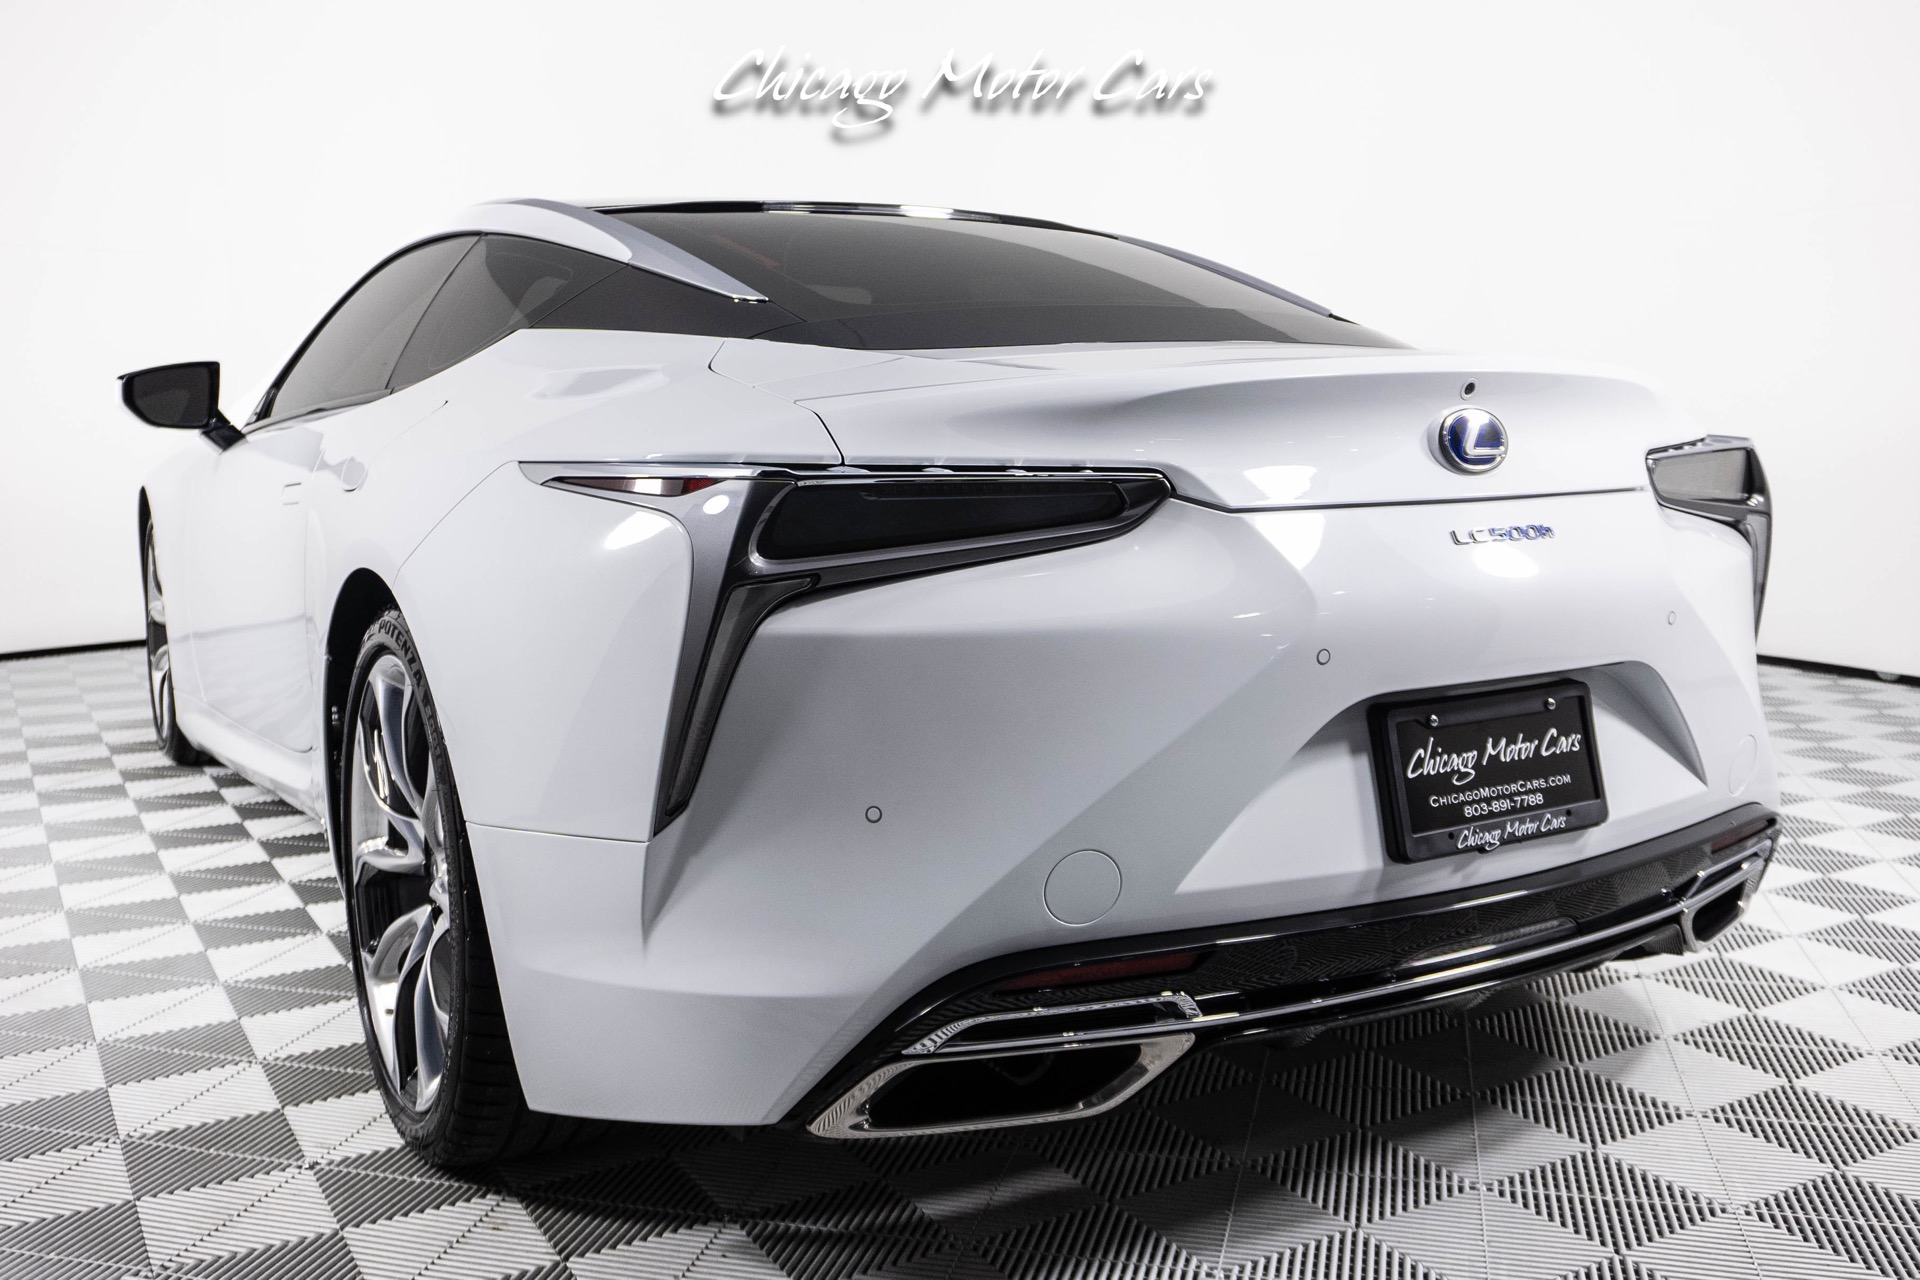 Used-2018-Lexus-LC500h-Hybrid-Well-Equipped-Luxury-Performance-Model-Loaded